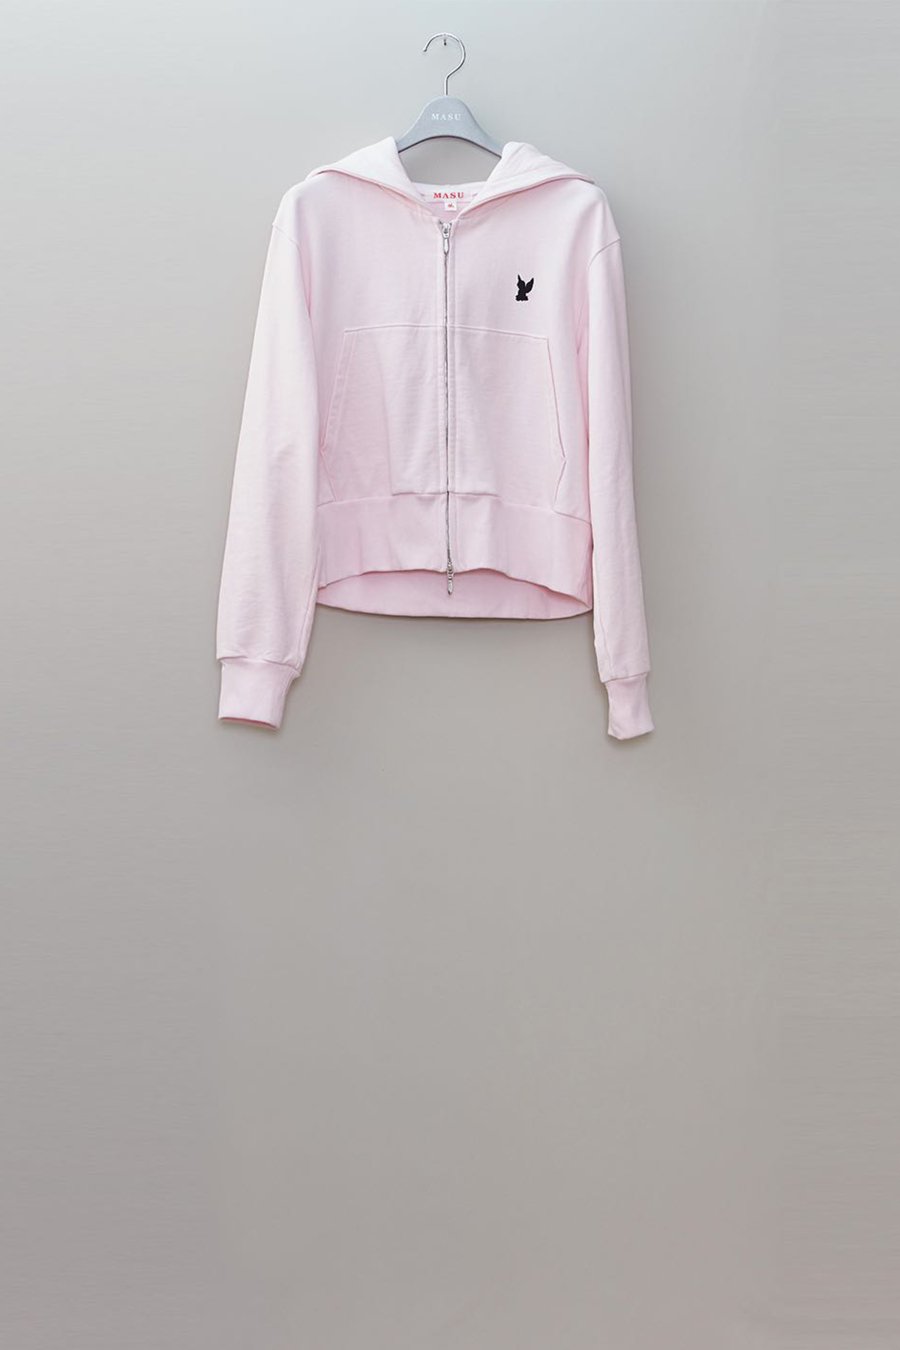 MASU  ANGEL ZIP-UP HOODIE(BABY PINK)<img class='new_mark_img2' src='https://img.shop-pro.jp/img/new/icons15.gif' style='border:none;display:inline;margin:0px;padding:0px;width:auto;' />